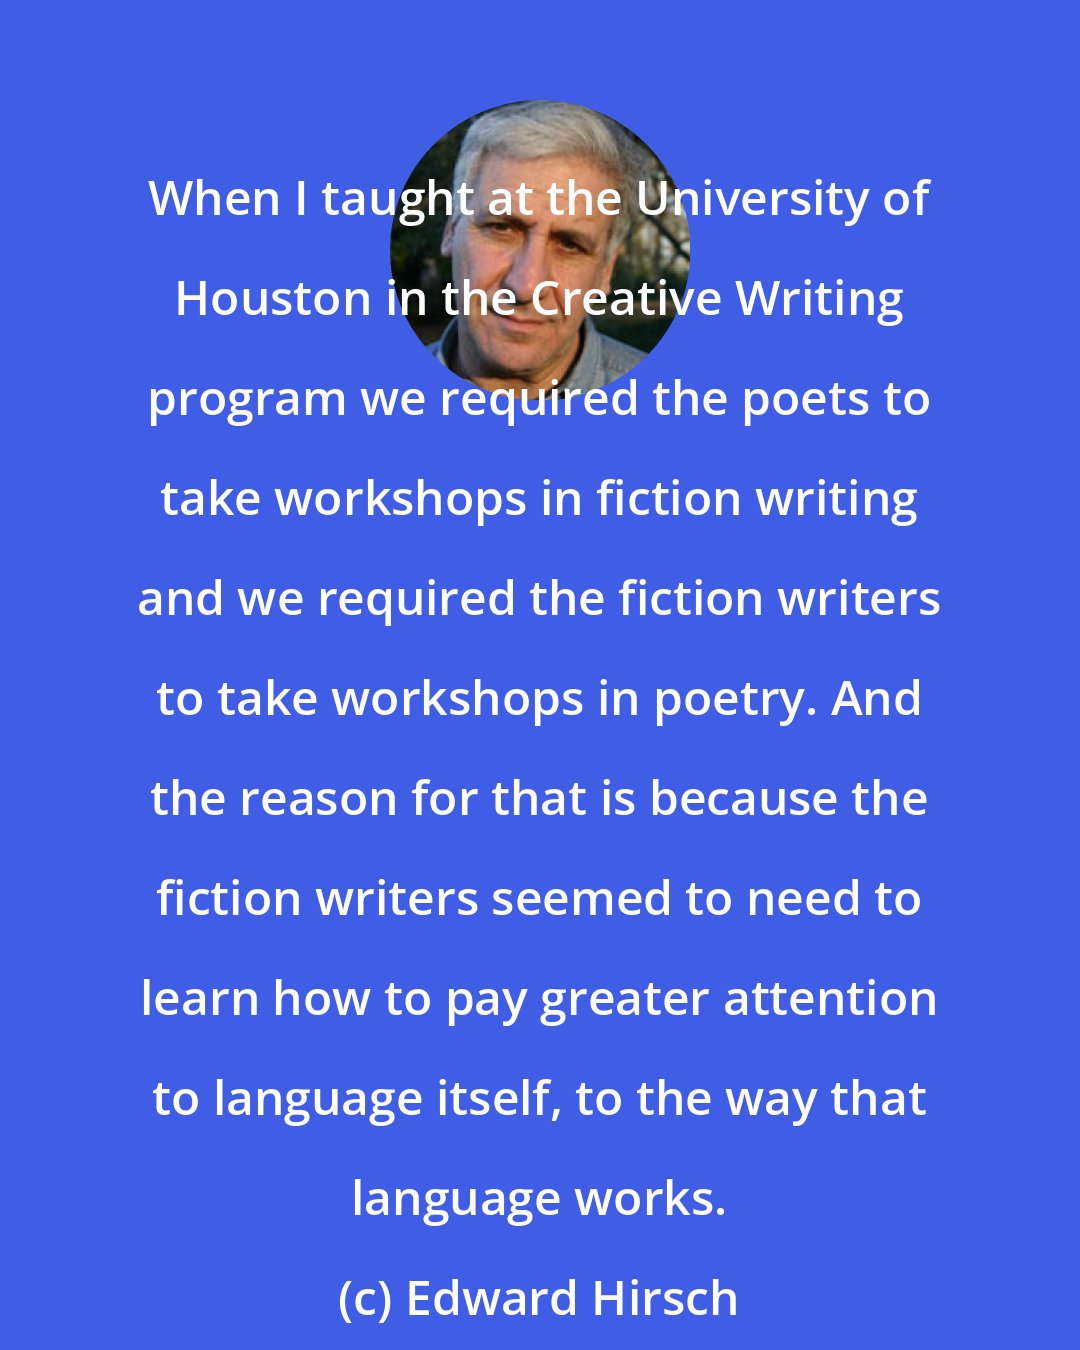 Edward Hirsch: When I taught at the University of Houston in the Creative Writing program we required the poets to take workshops in fiction writing and we required the fiction writers to take workshops in poetry. And the reason for that is because the fiction writers seemed to need to learn how to pay greater attention to language itself, to the way that language works.